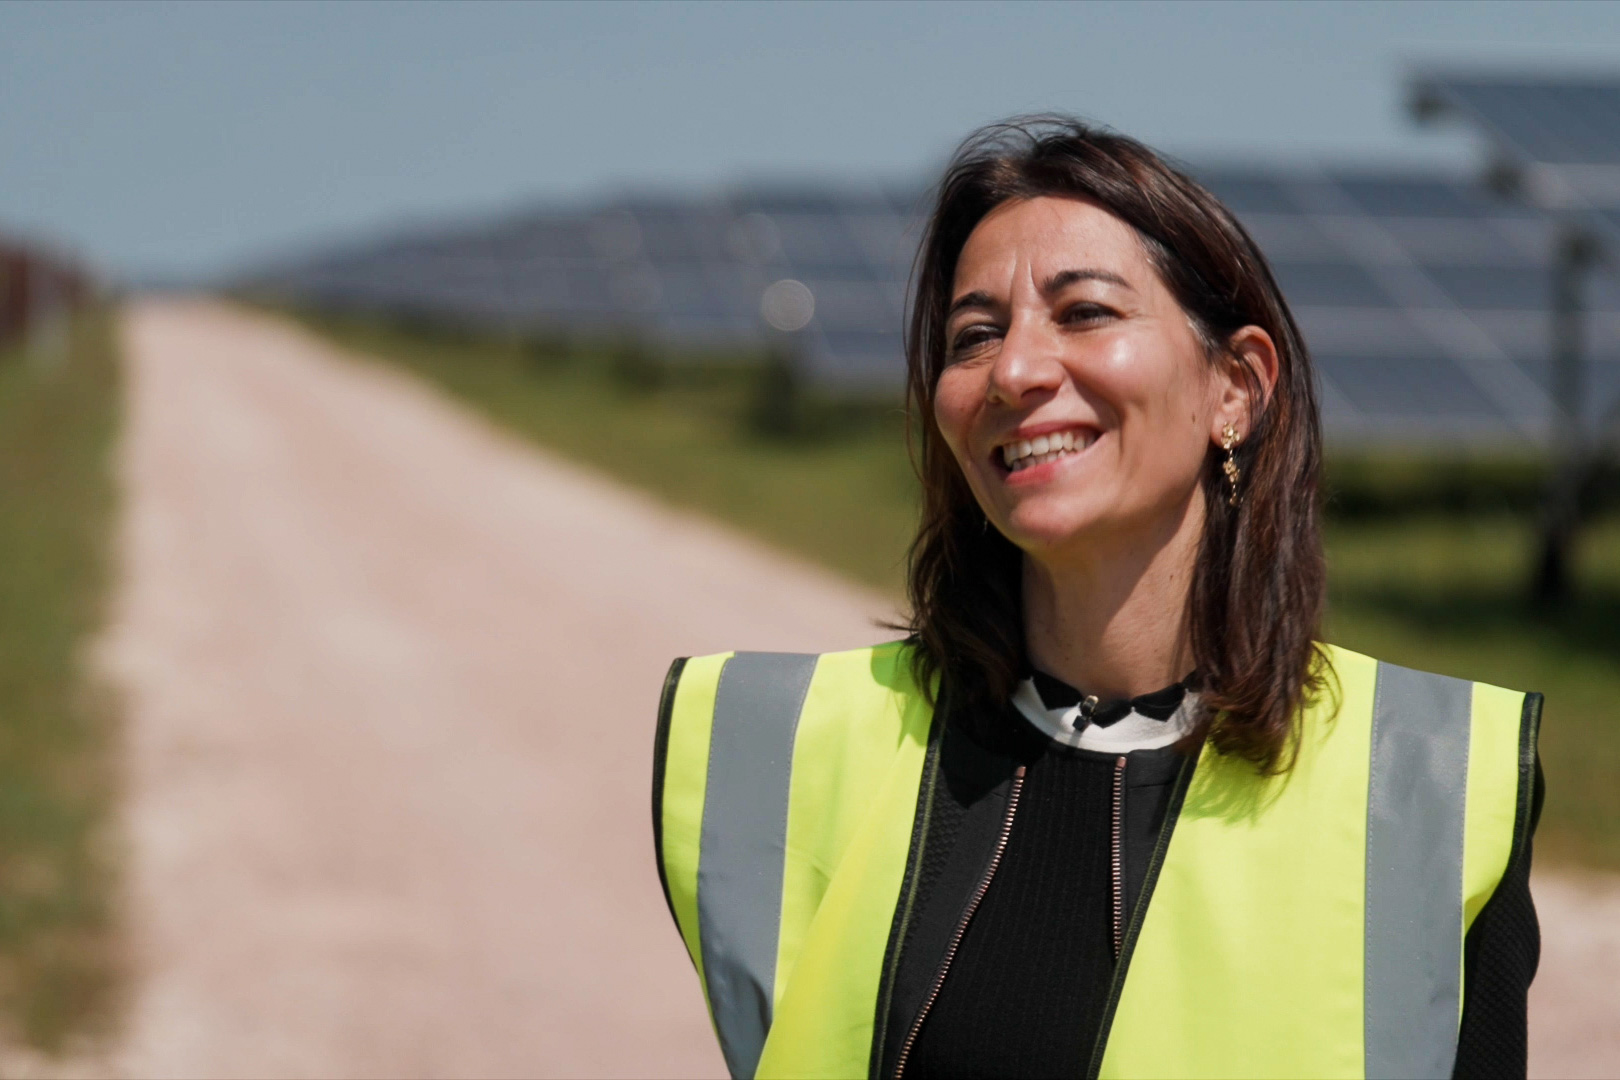 Image of Francesca Serravalle, Vodafone’s UK Head of Infrastructure and Energy at Codford solar farm.